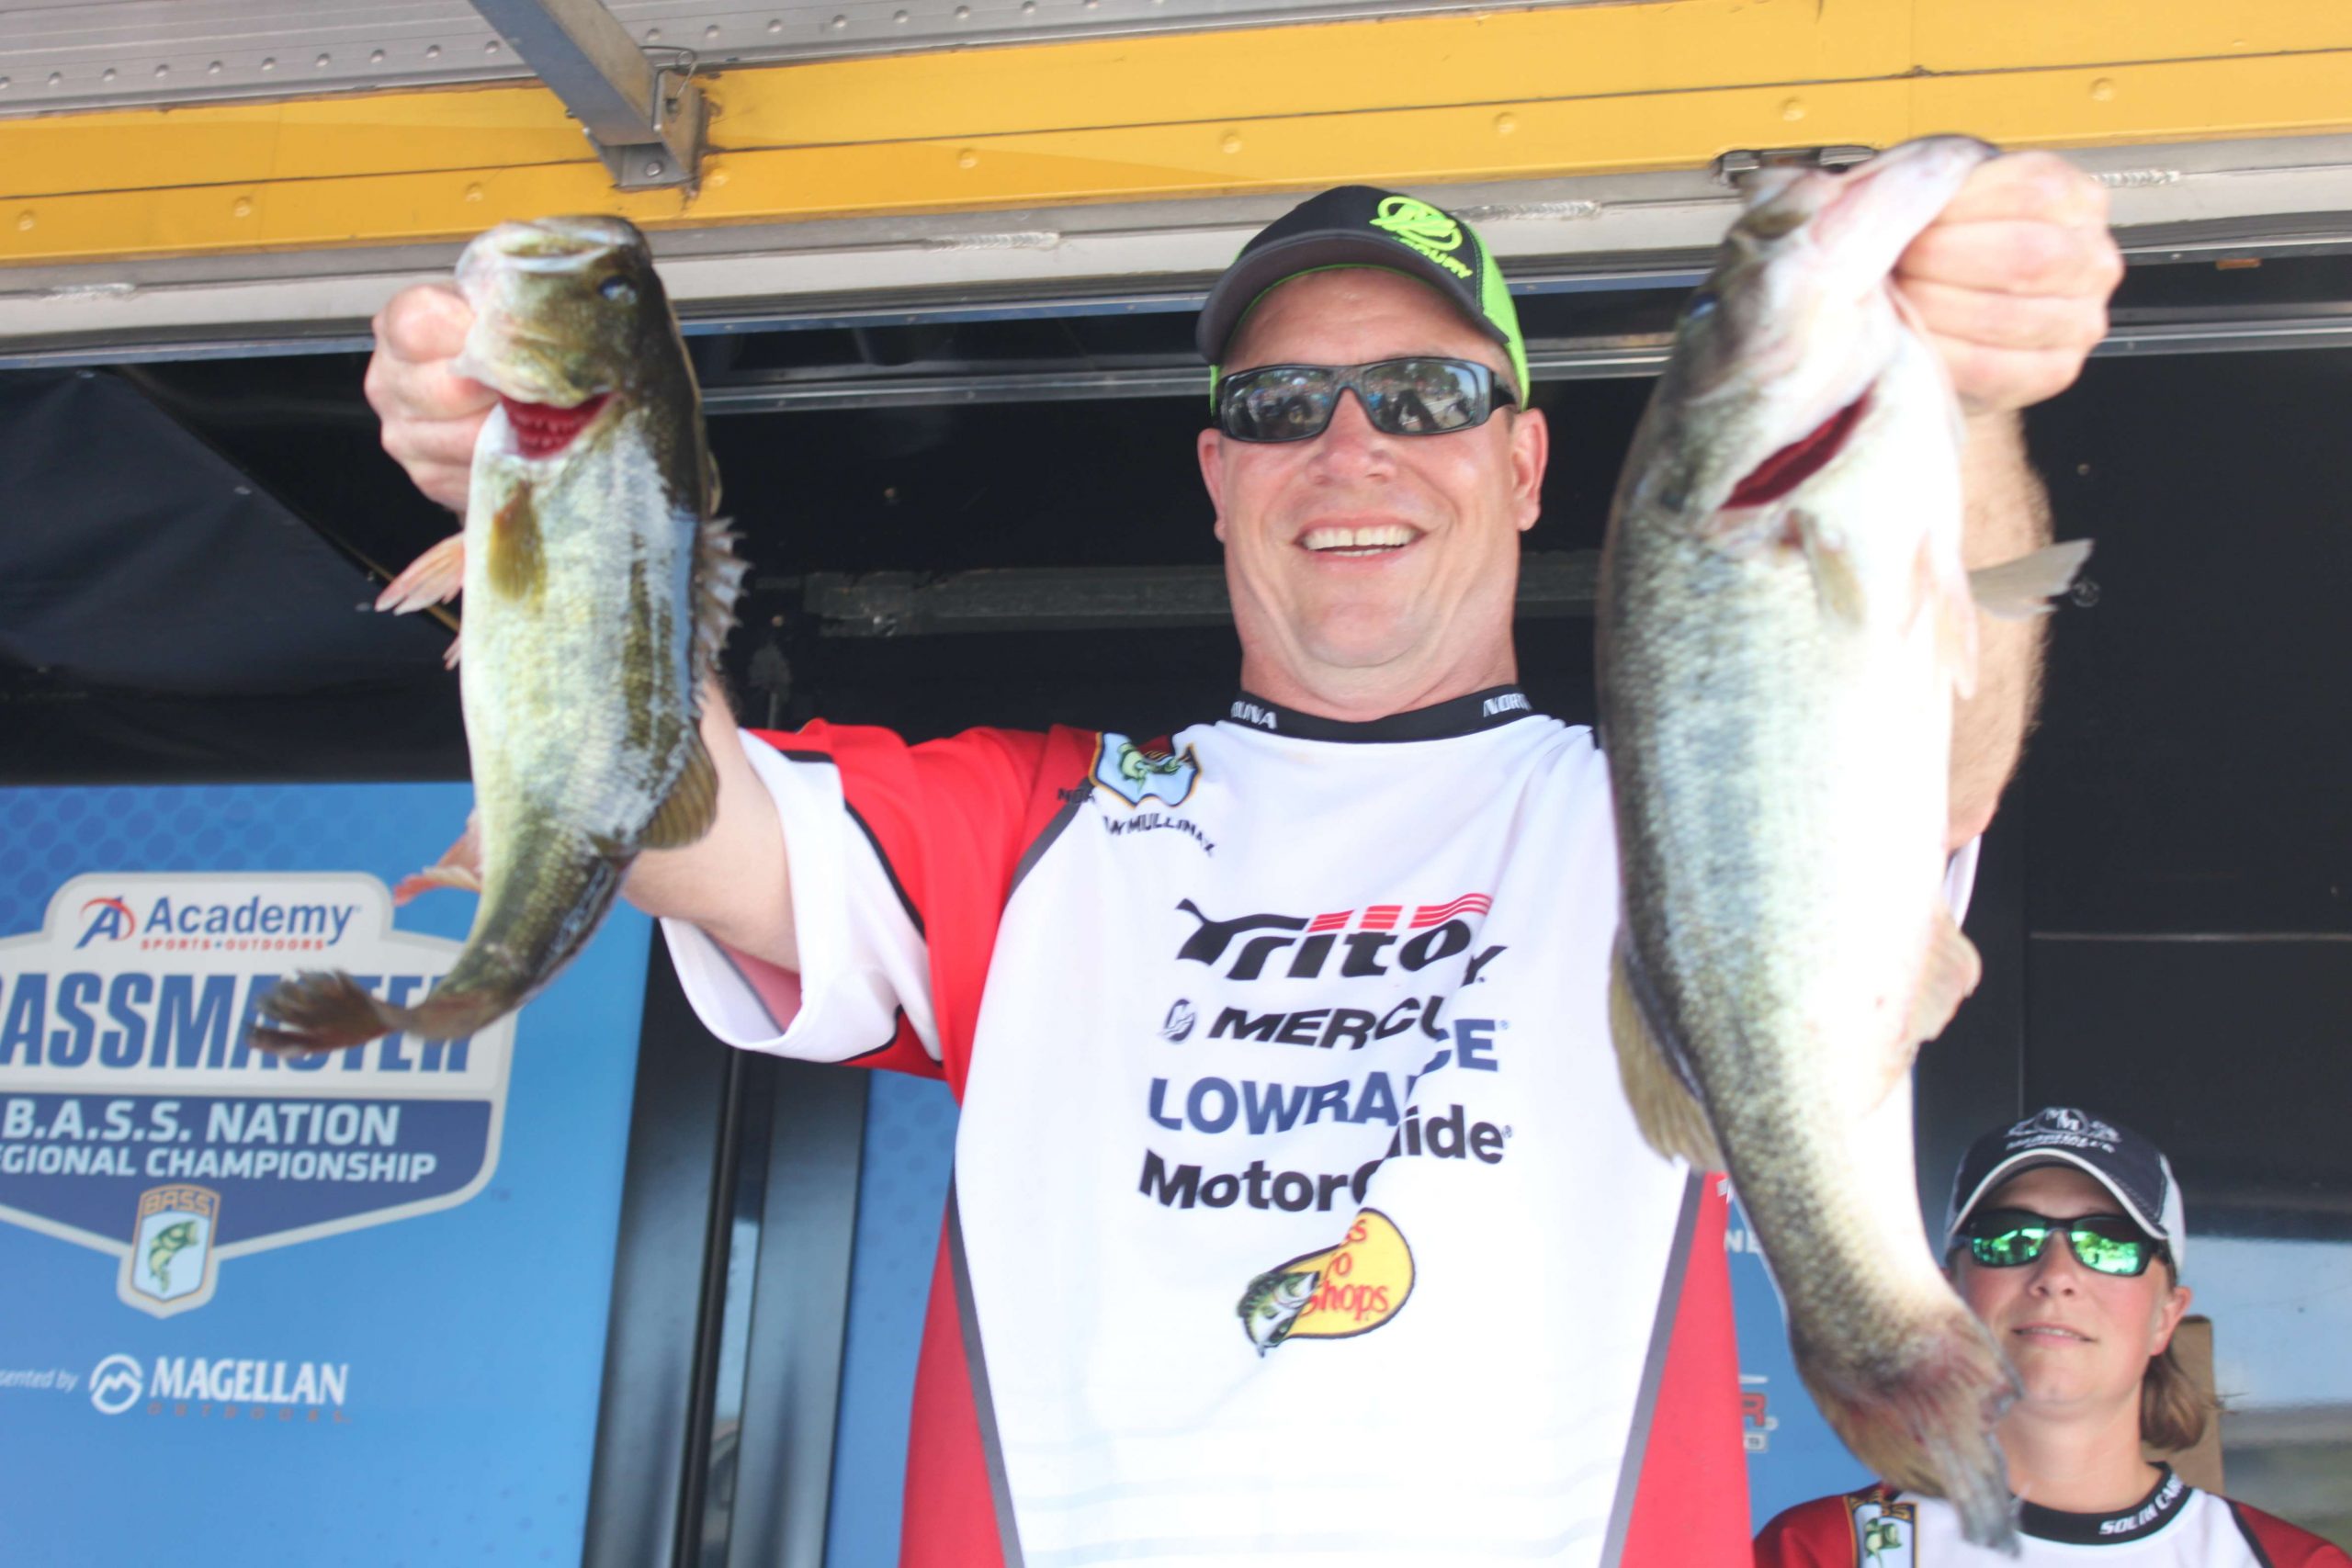 Norman Mullinax had a great tournament. The North Carolina angler finished third in the boater division with a 29-2 total. He caught a 10-13 limit on Friday, which was the third heaviest bag of the day.